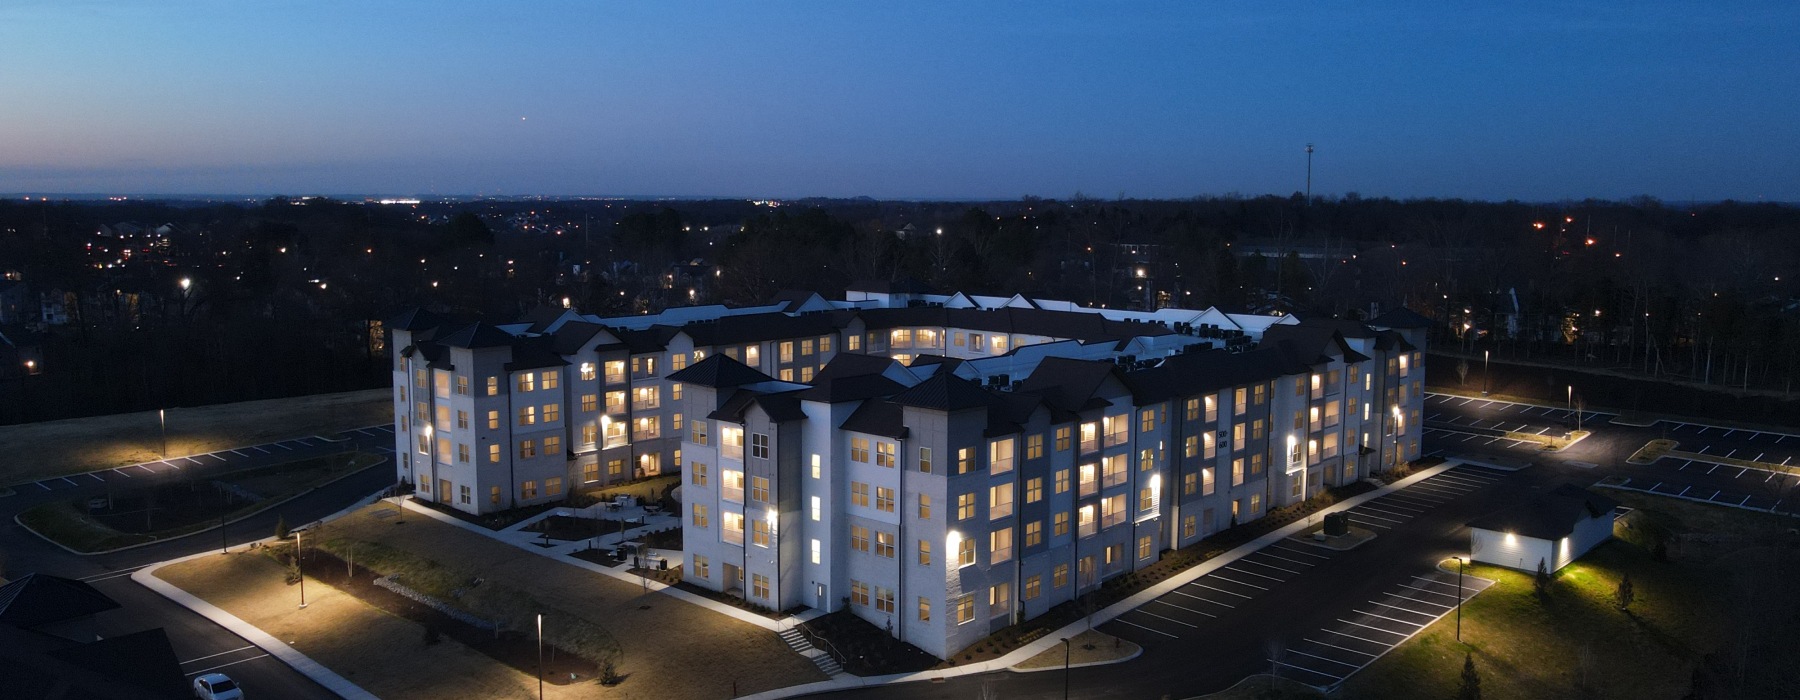 Aerial view of four-story apartment building at night with all lights turned on